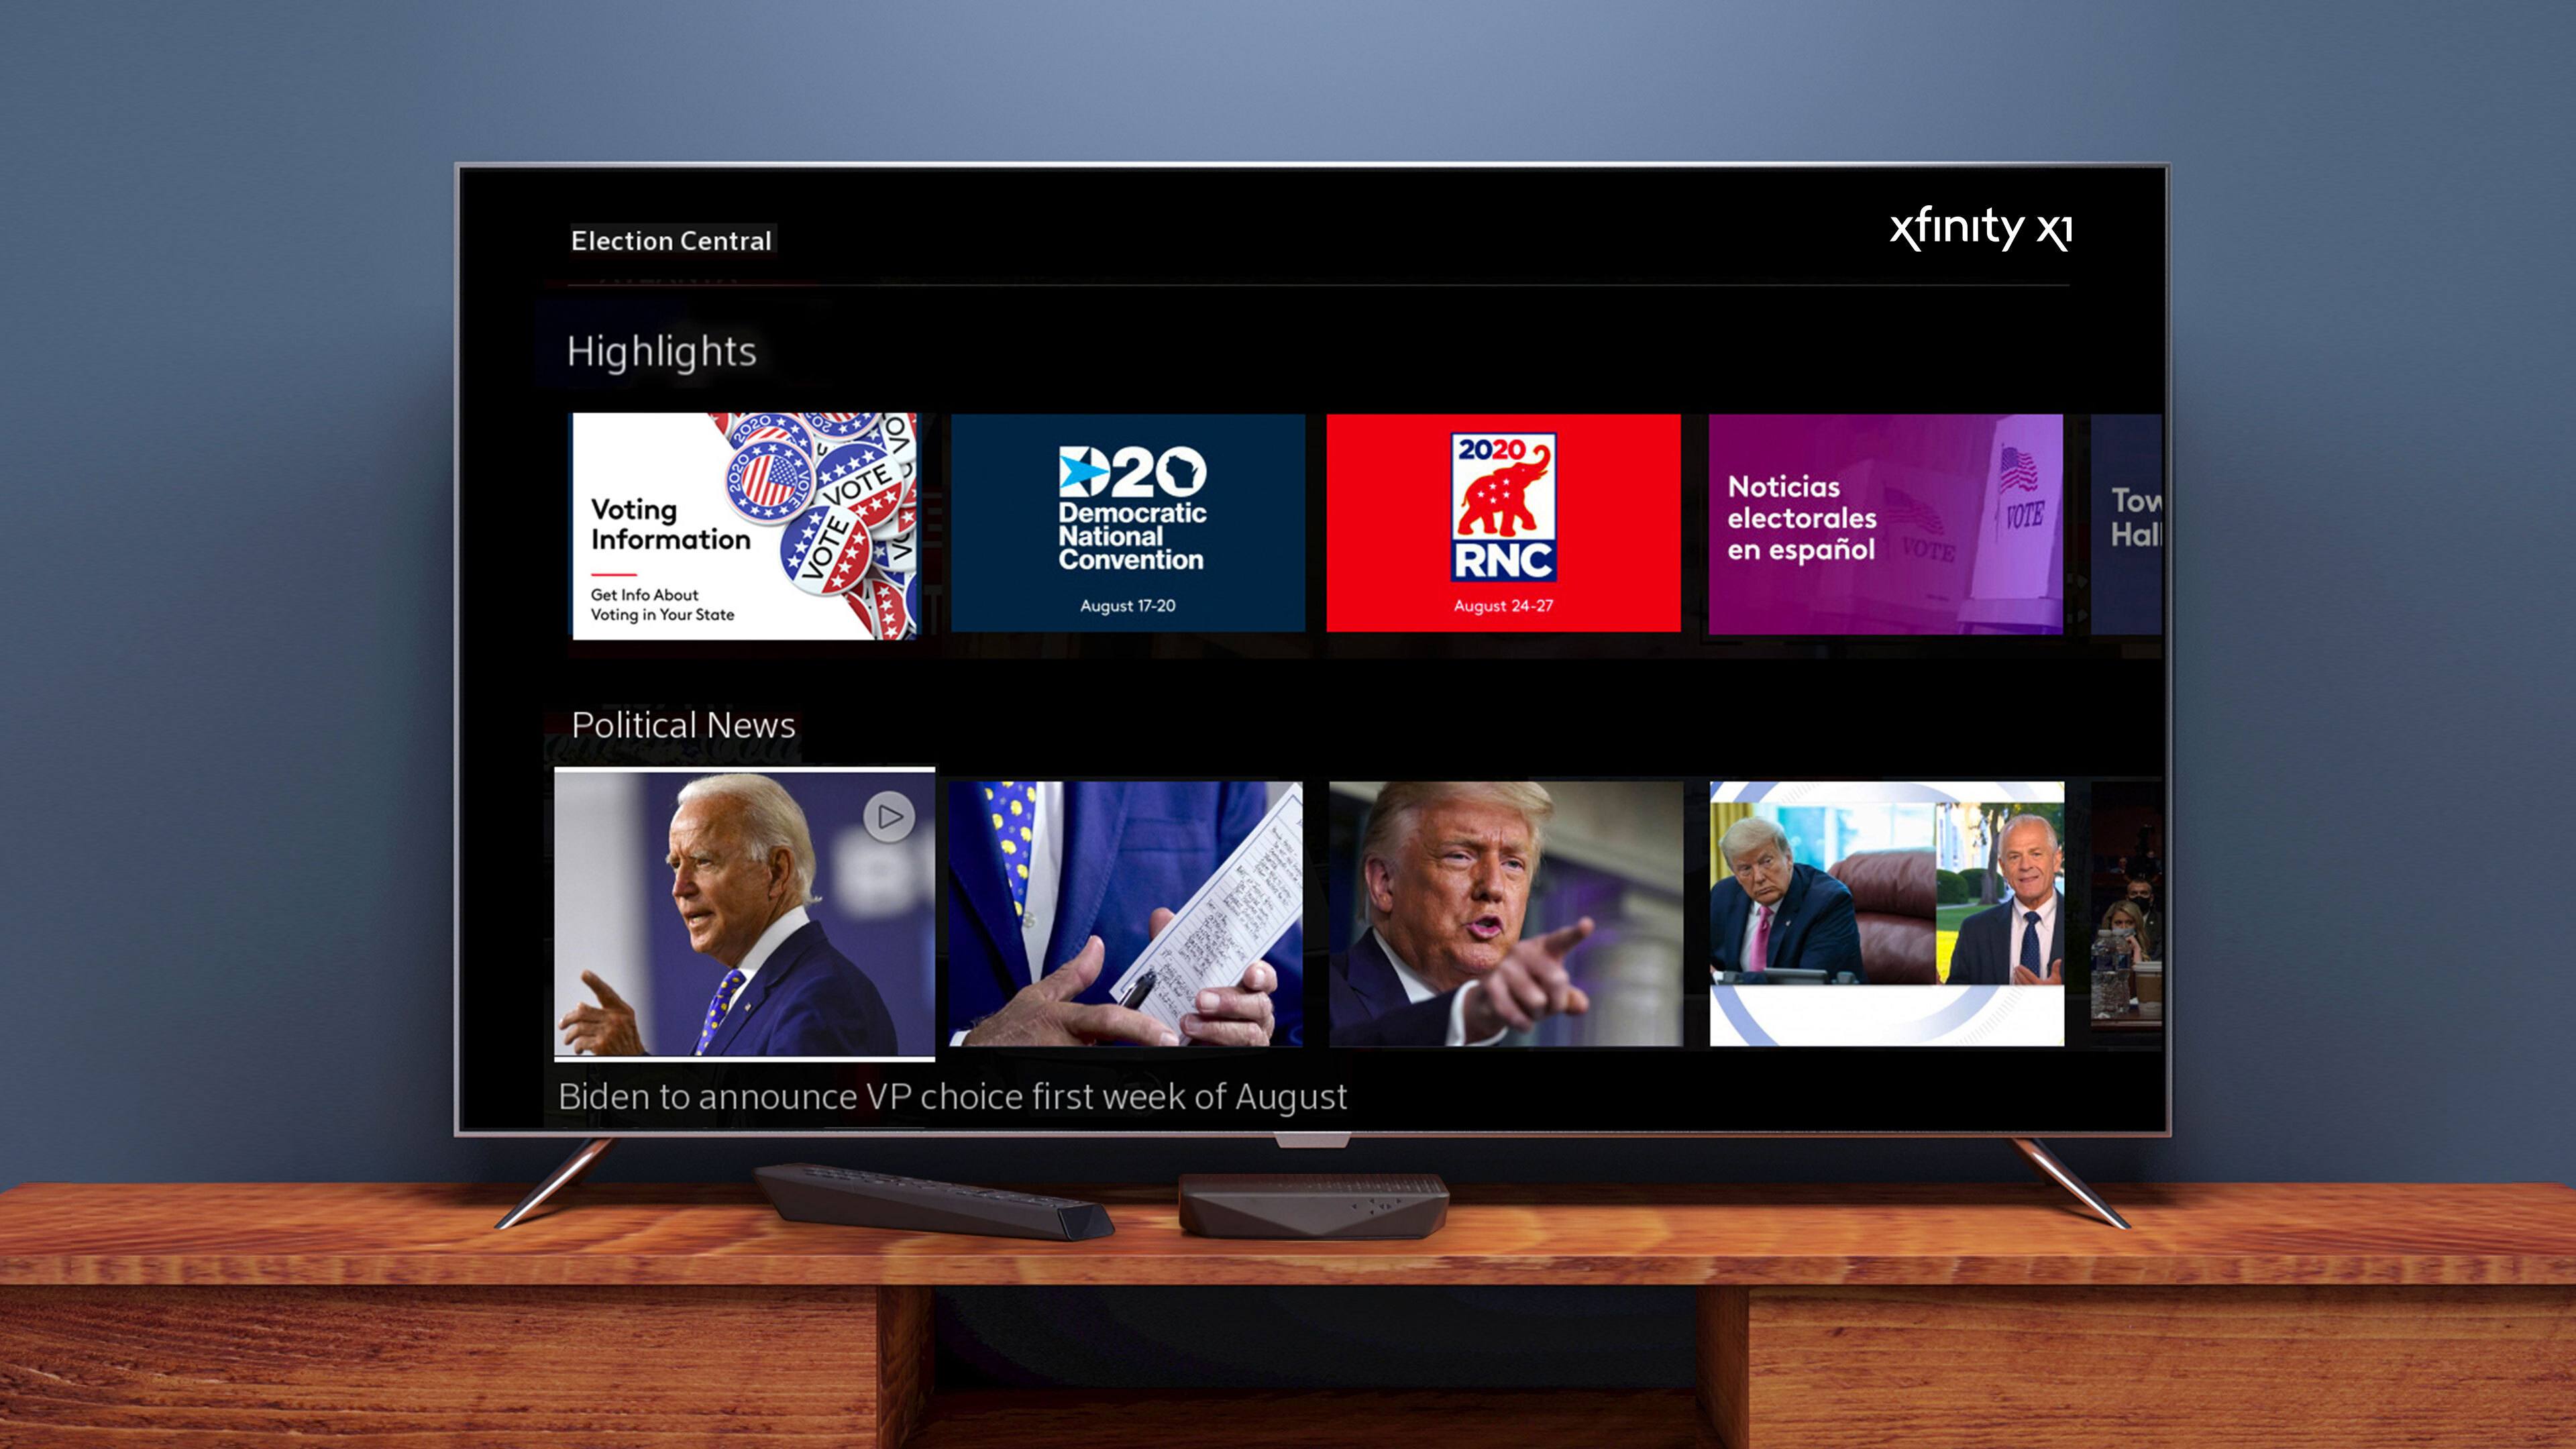 Xfinity Offers Interactive Election News for X1 and Flex